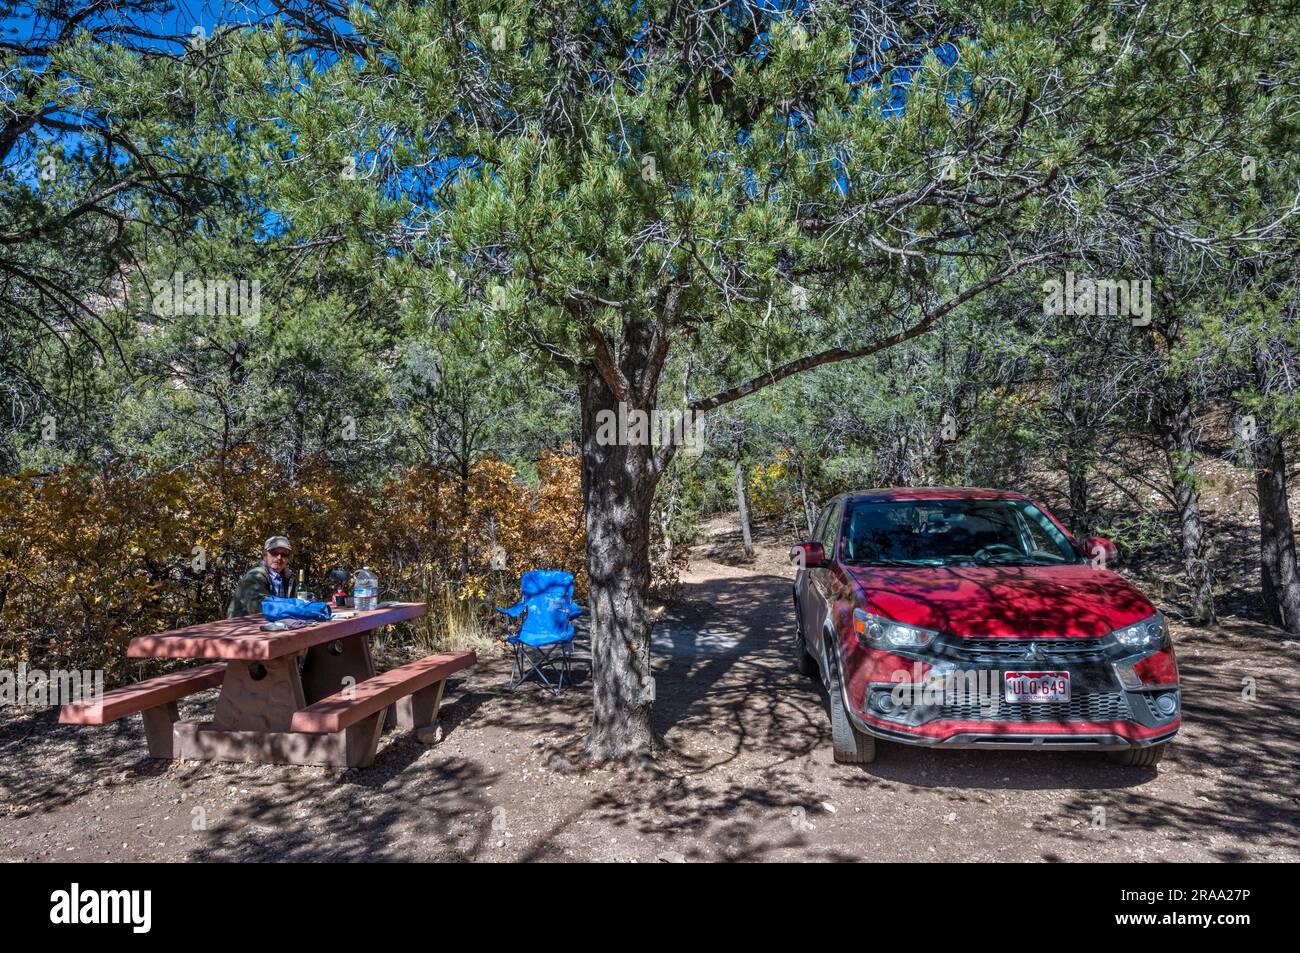 Campeggio presso Indian Hollow Campground, Kaibab Plateau, Kaibab National Forest, vicino al punto panoramico Little Saddle del Grand Canyon, Arizona, USA Foto Stock